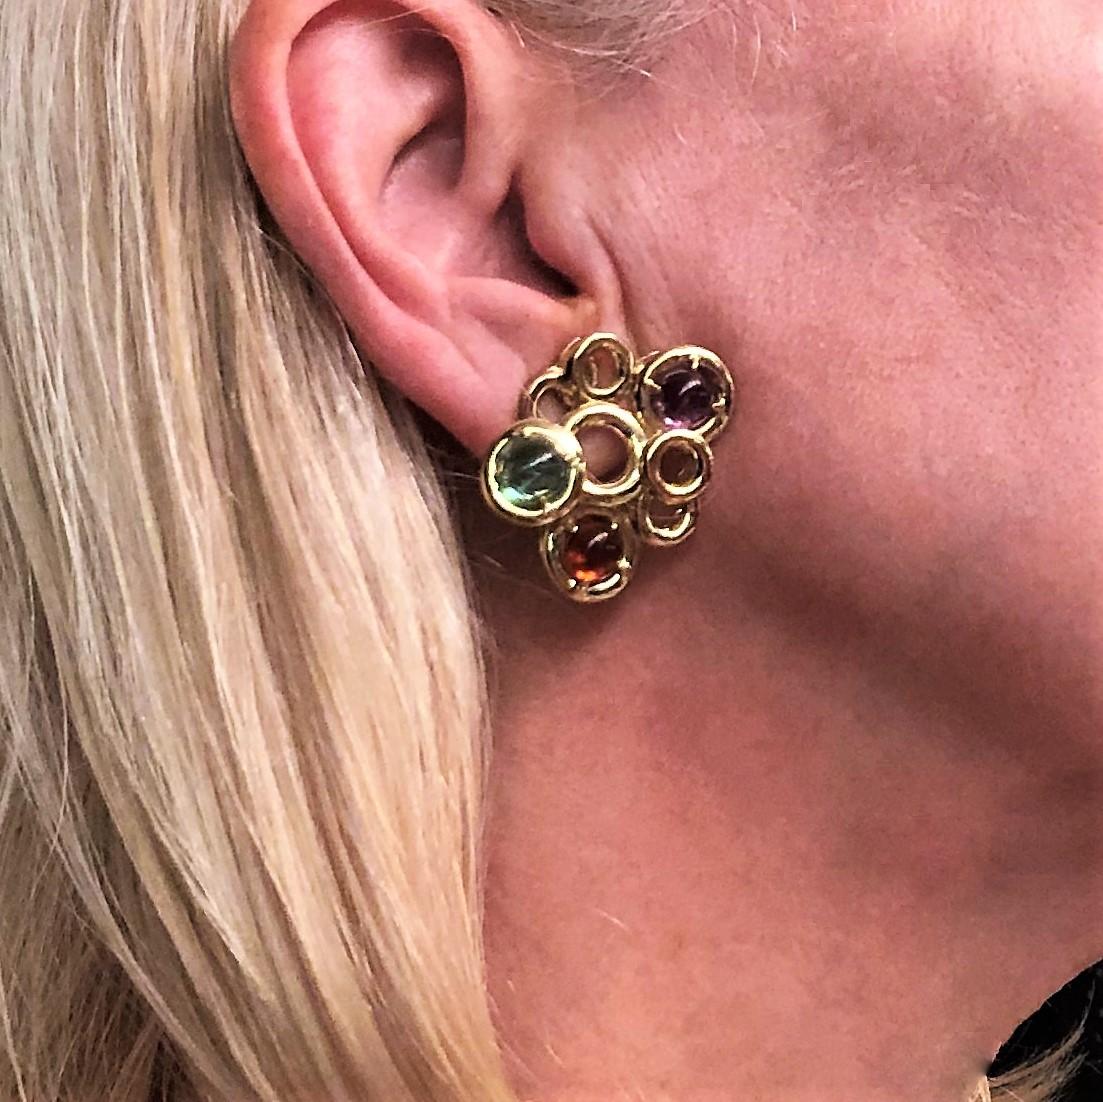 Made in Italy, these lovely 1960s clip on earrings are made of 18K Yellow Gold circles set  with six cabochon semi precious stones, Aquamarine, Amethyst and Citrine. The soft colors are wonderful to be worn with your spring wardrobe. They measure 1 